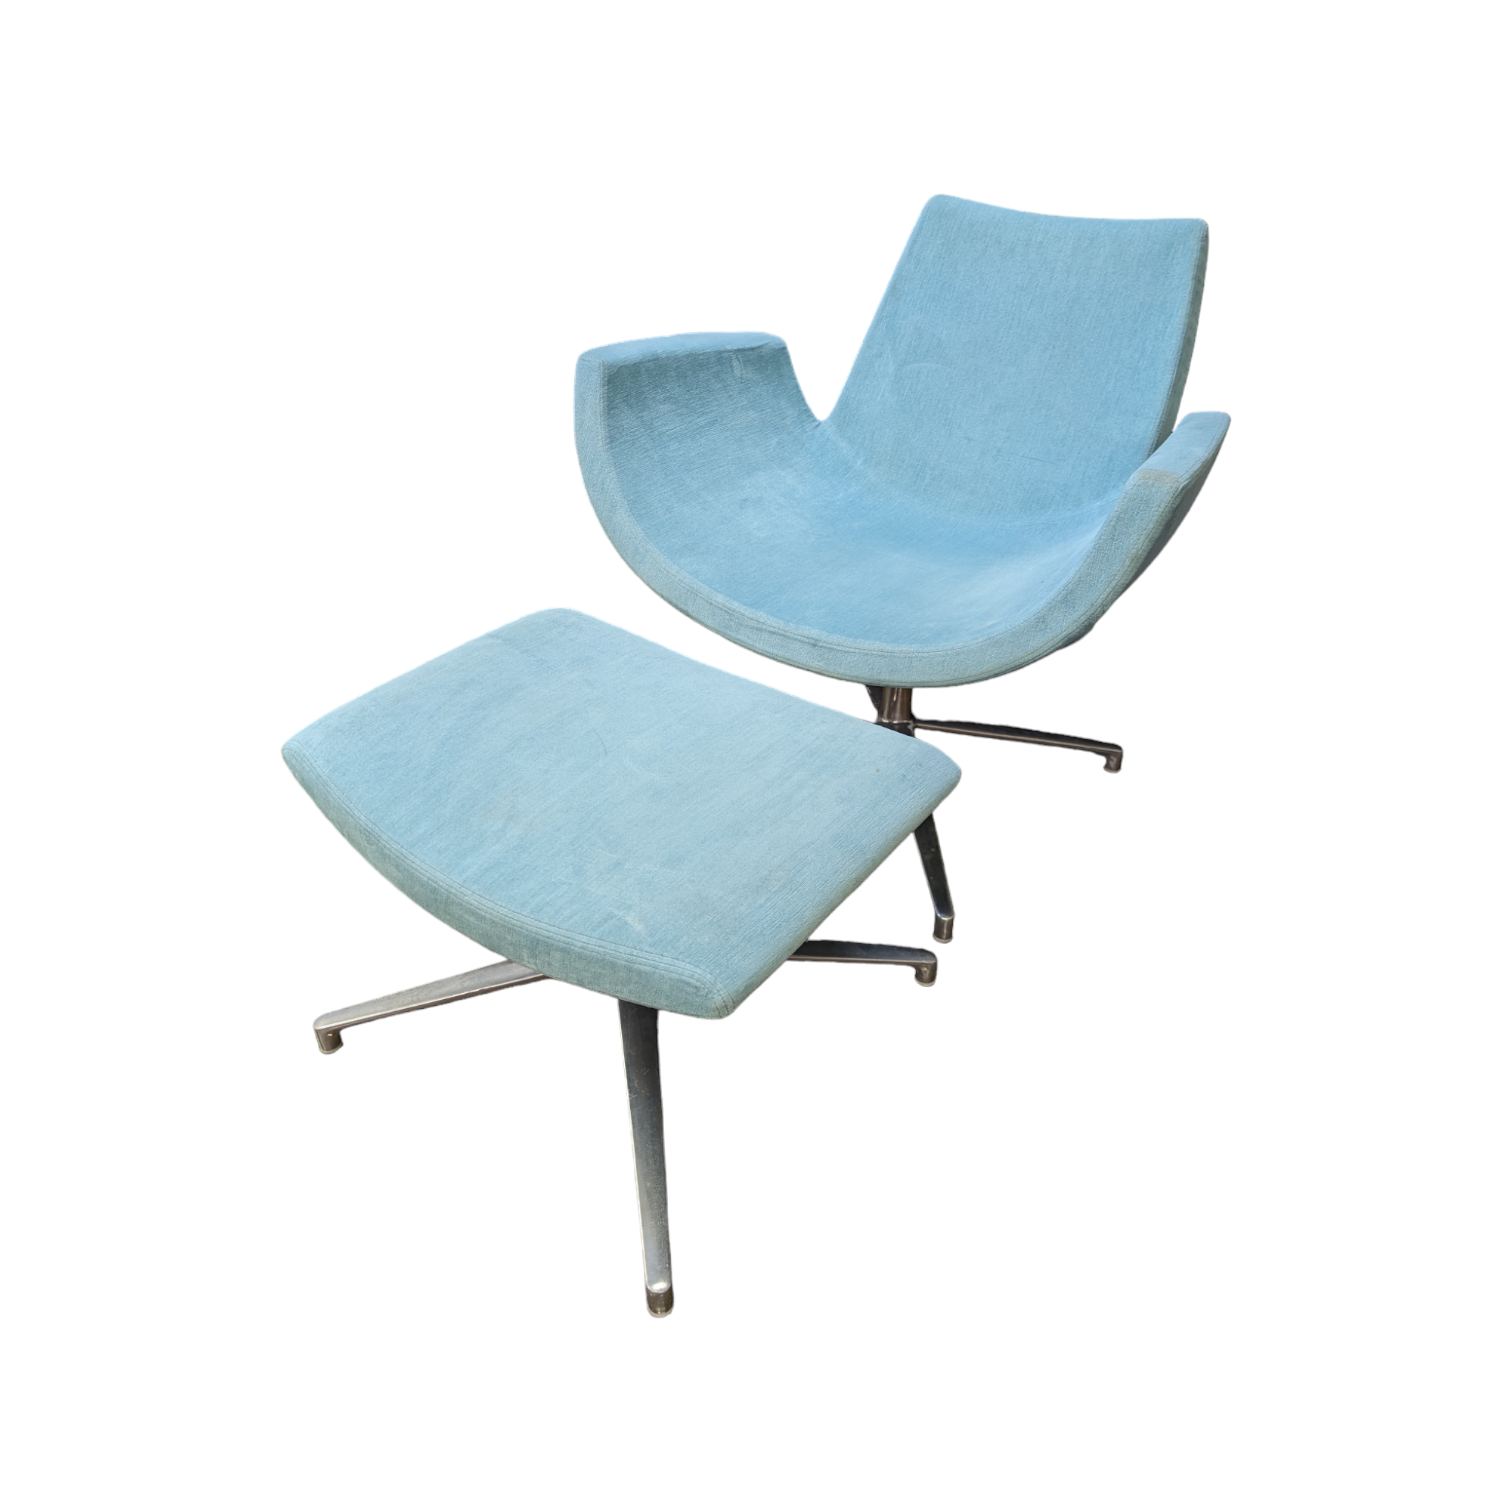 Used gordon teal fabric lounge chair with matching ottomon